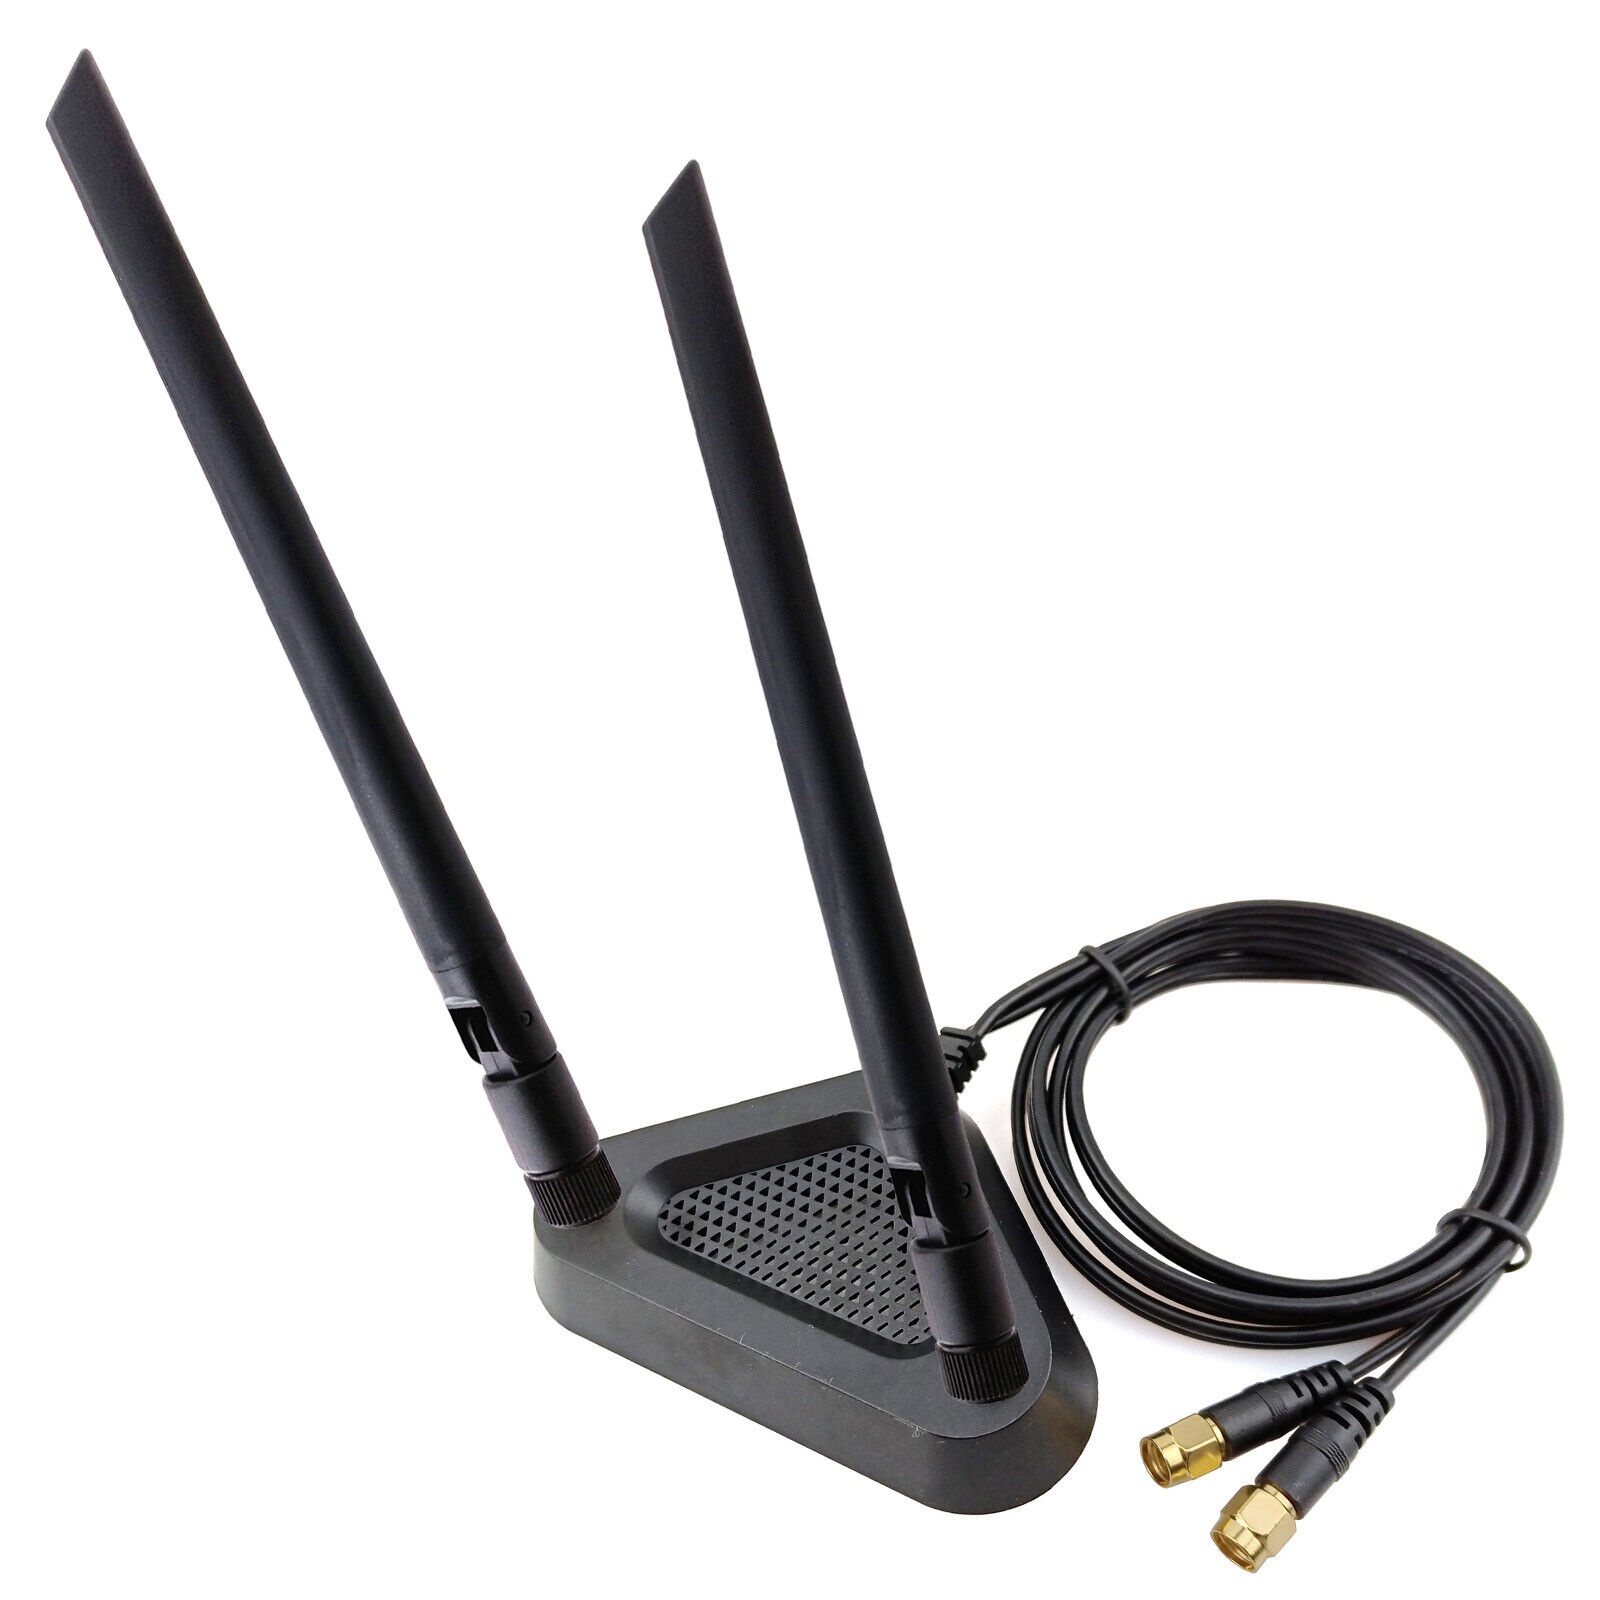 Dual WiFi Antenna Magnetic Stand RP-SMA Cable Range Wireless Network Extender